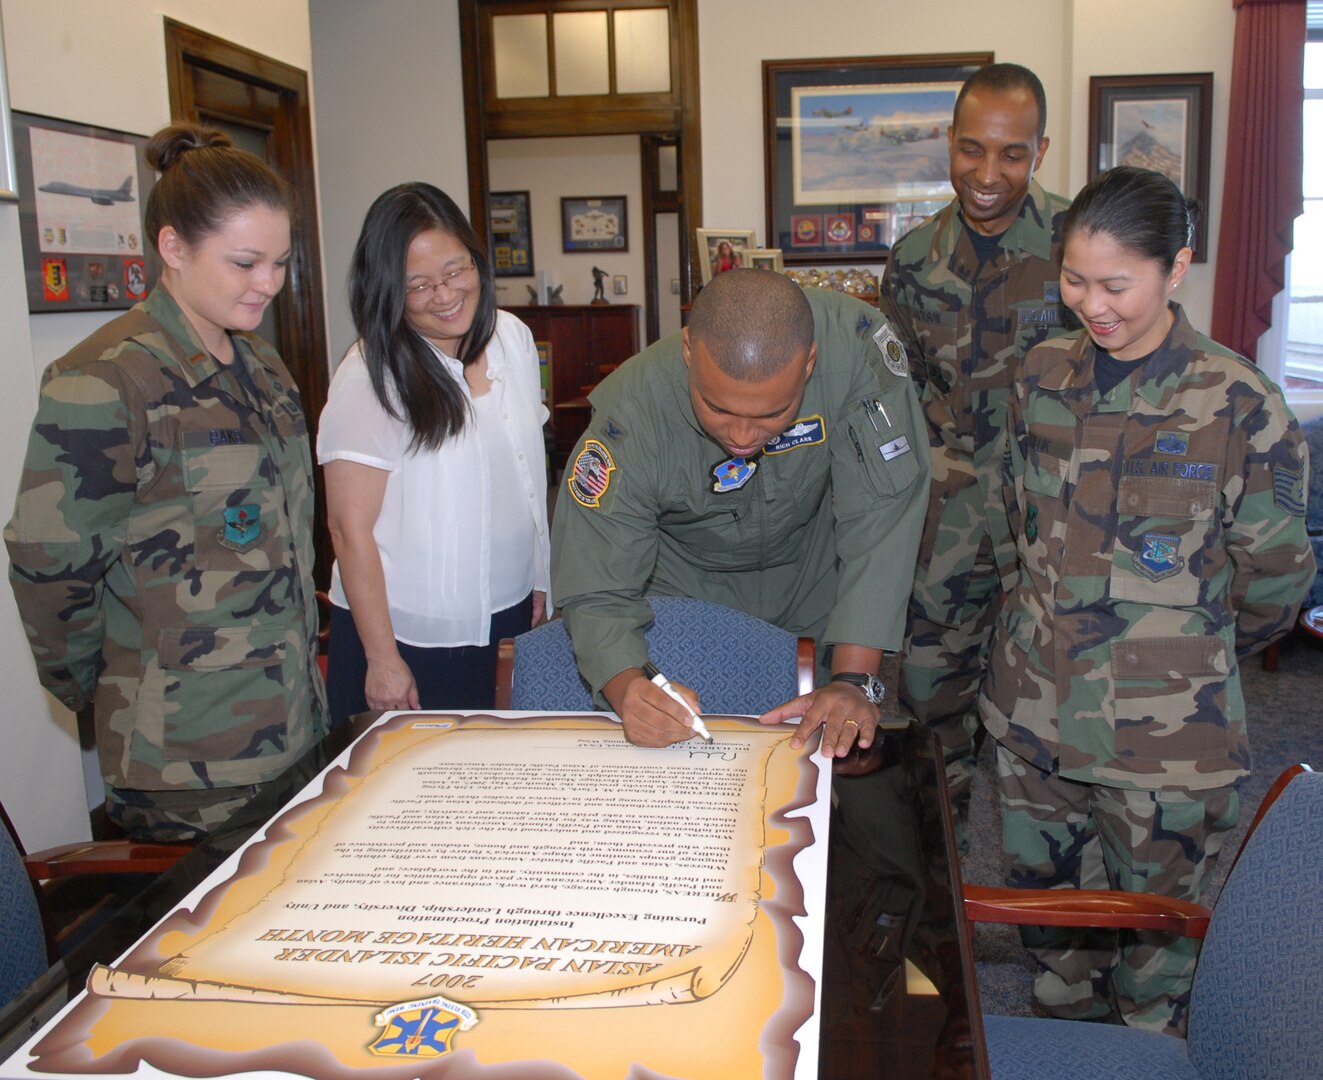 Col. Richard Clark, (center) 12th Flying Training Wing commander, signs the Asian Pacific American Heritage Month proclamation April 26 as members of the APAHM organizational committe look on. (From left to right) 2nd Lt. Elizabeth Baker, 12th FTW project officer, Kathryn Baker, 5K run coordinator, Master Sgt. Aaron Jackson, 12th FTW Military Equal Opportunity advisor, and Tech Sgt. Myrla Kiluk, Committee co-chairman. There are numerous events planned for the month in celebration of the diversity of Randolph's community. For more information on the events planned for the month, call Lieutenant Baker at 652-5181 or Sergeant Kiluk at 652-2265. 